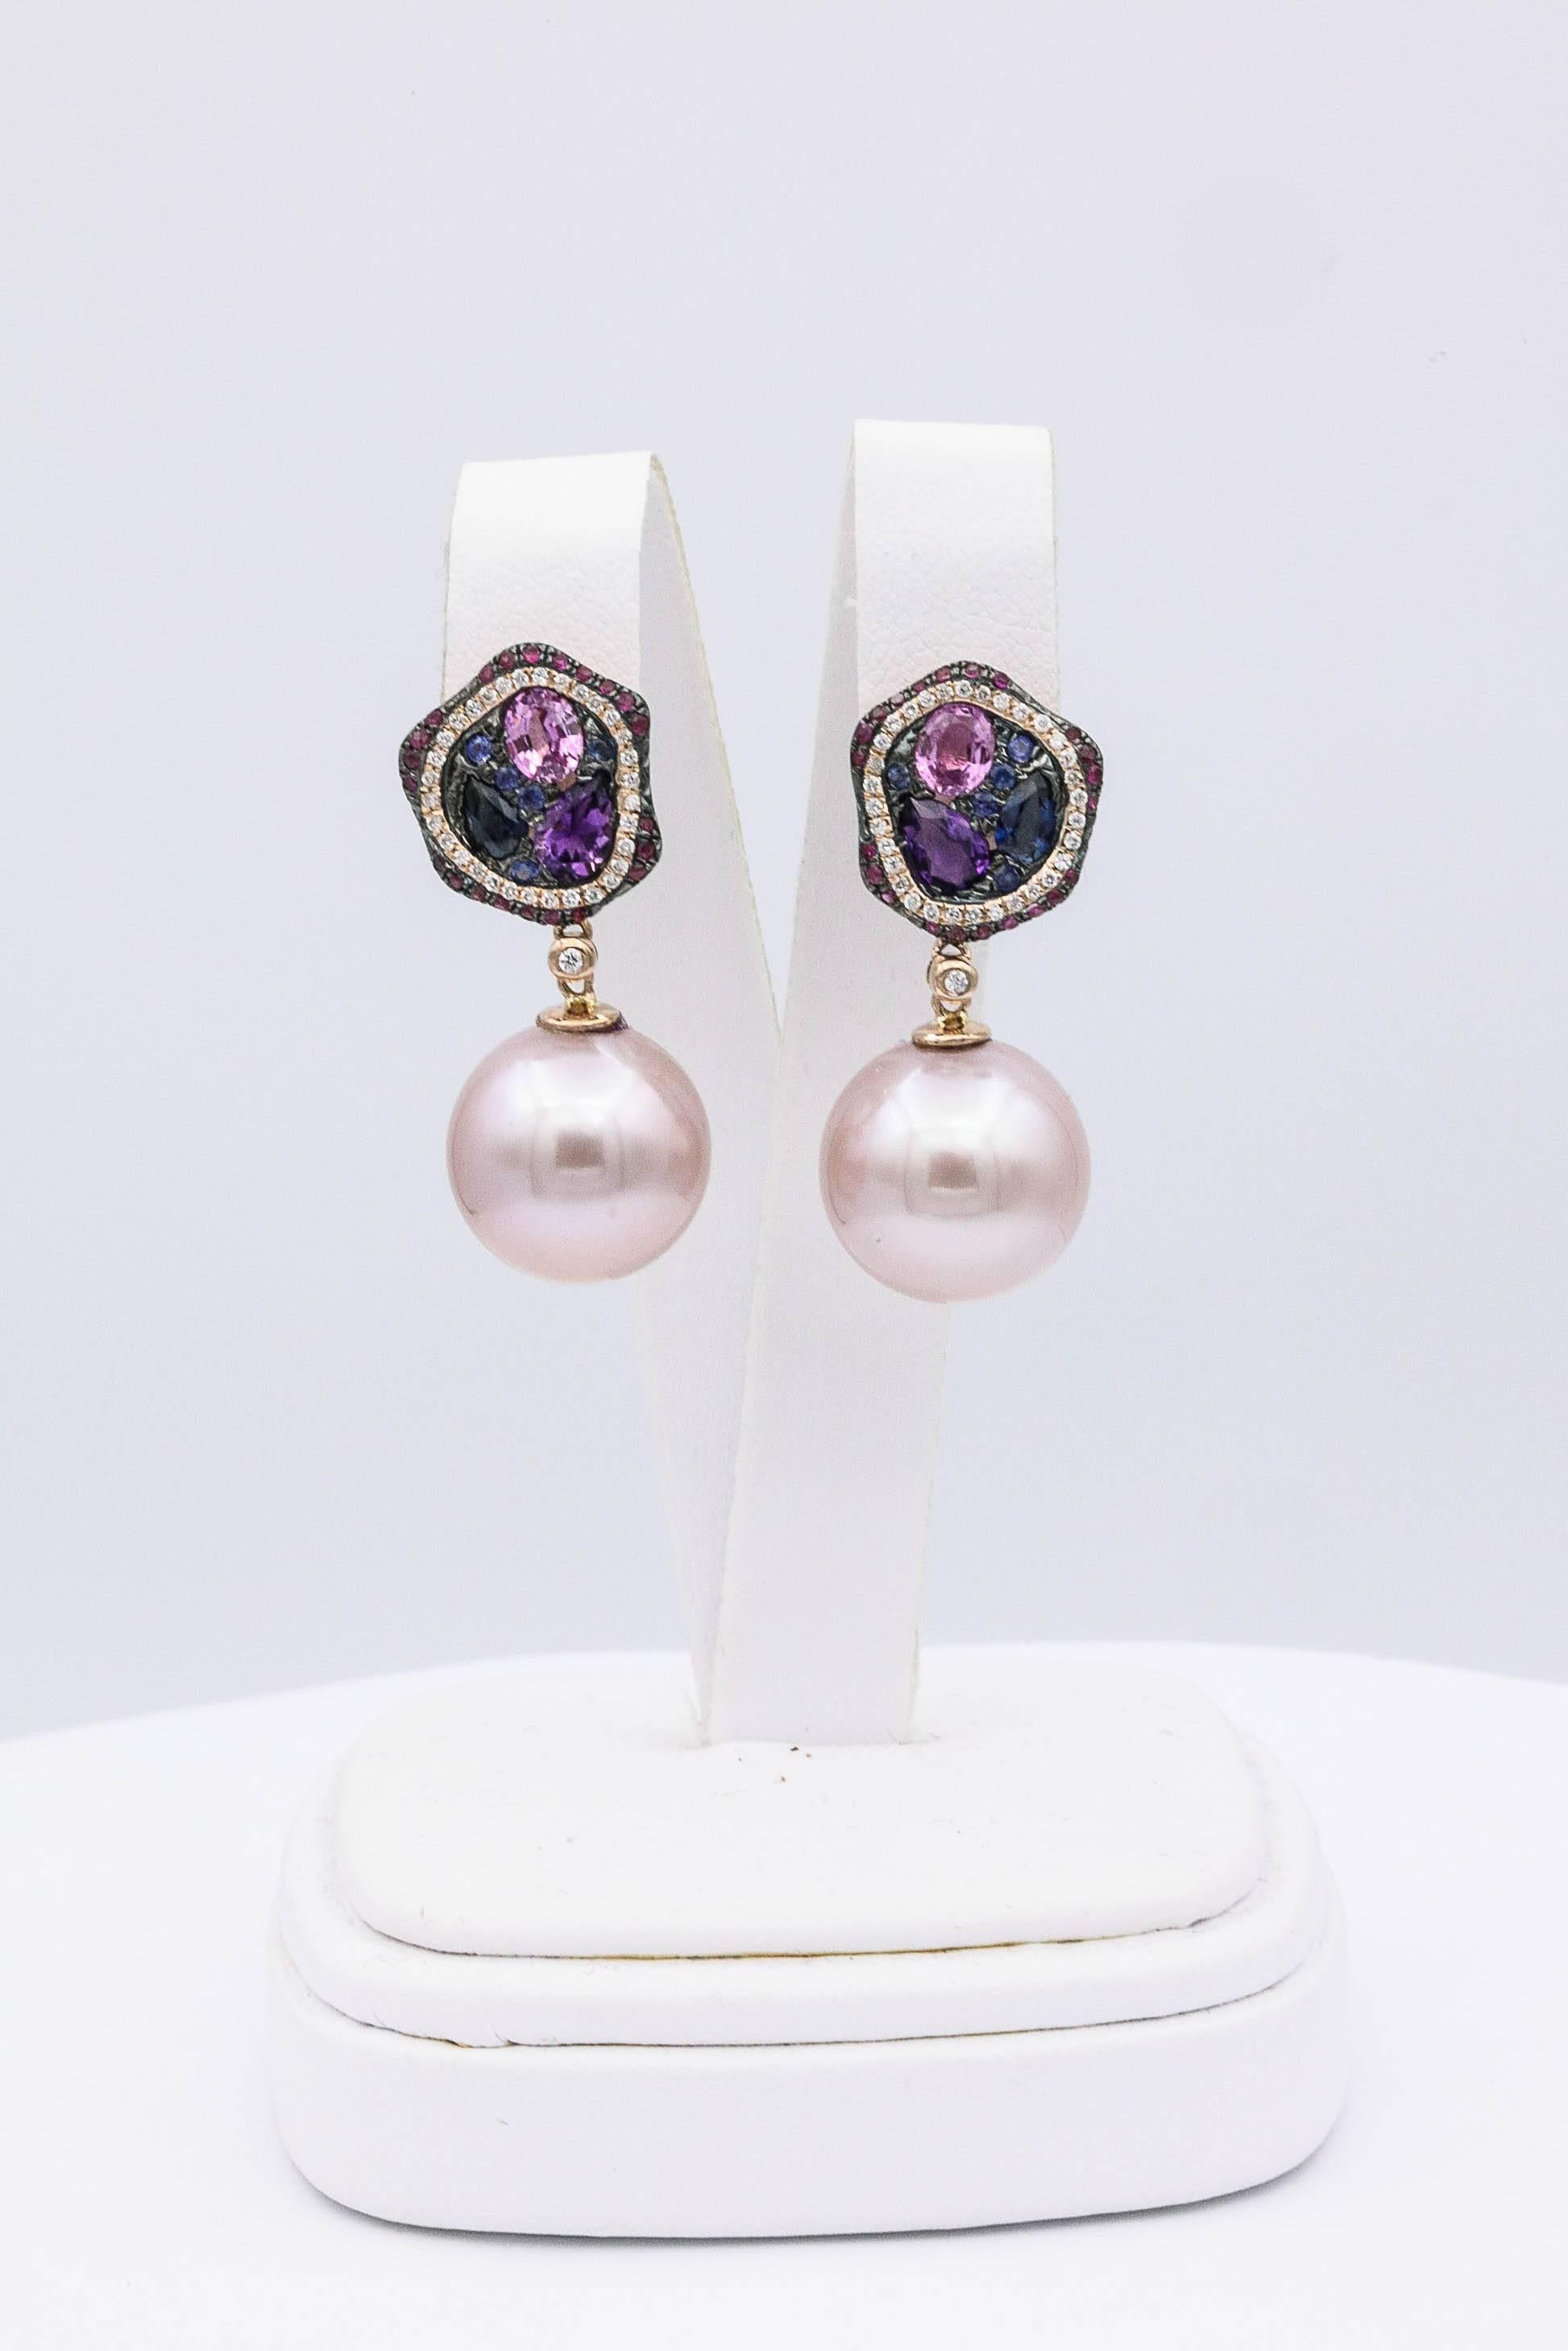 18K Rose Gold
Sapphire 1.80 Carats
Diamonds 0.23 Carats
Freshwater Pearl 14-15mm
The earrings are 1.25